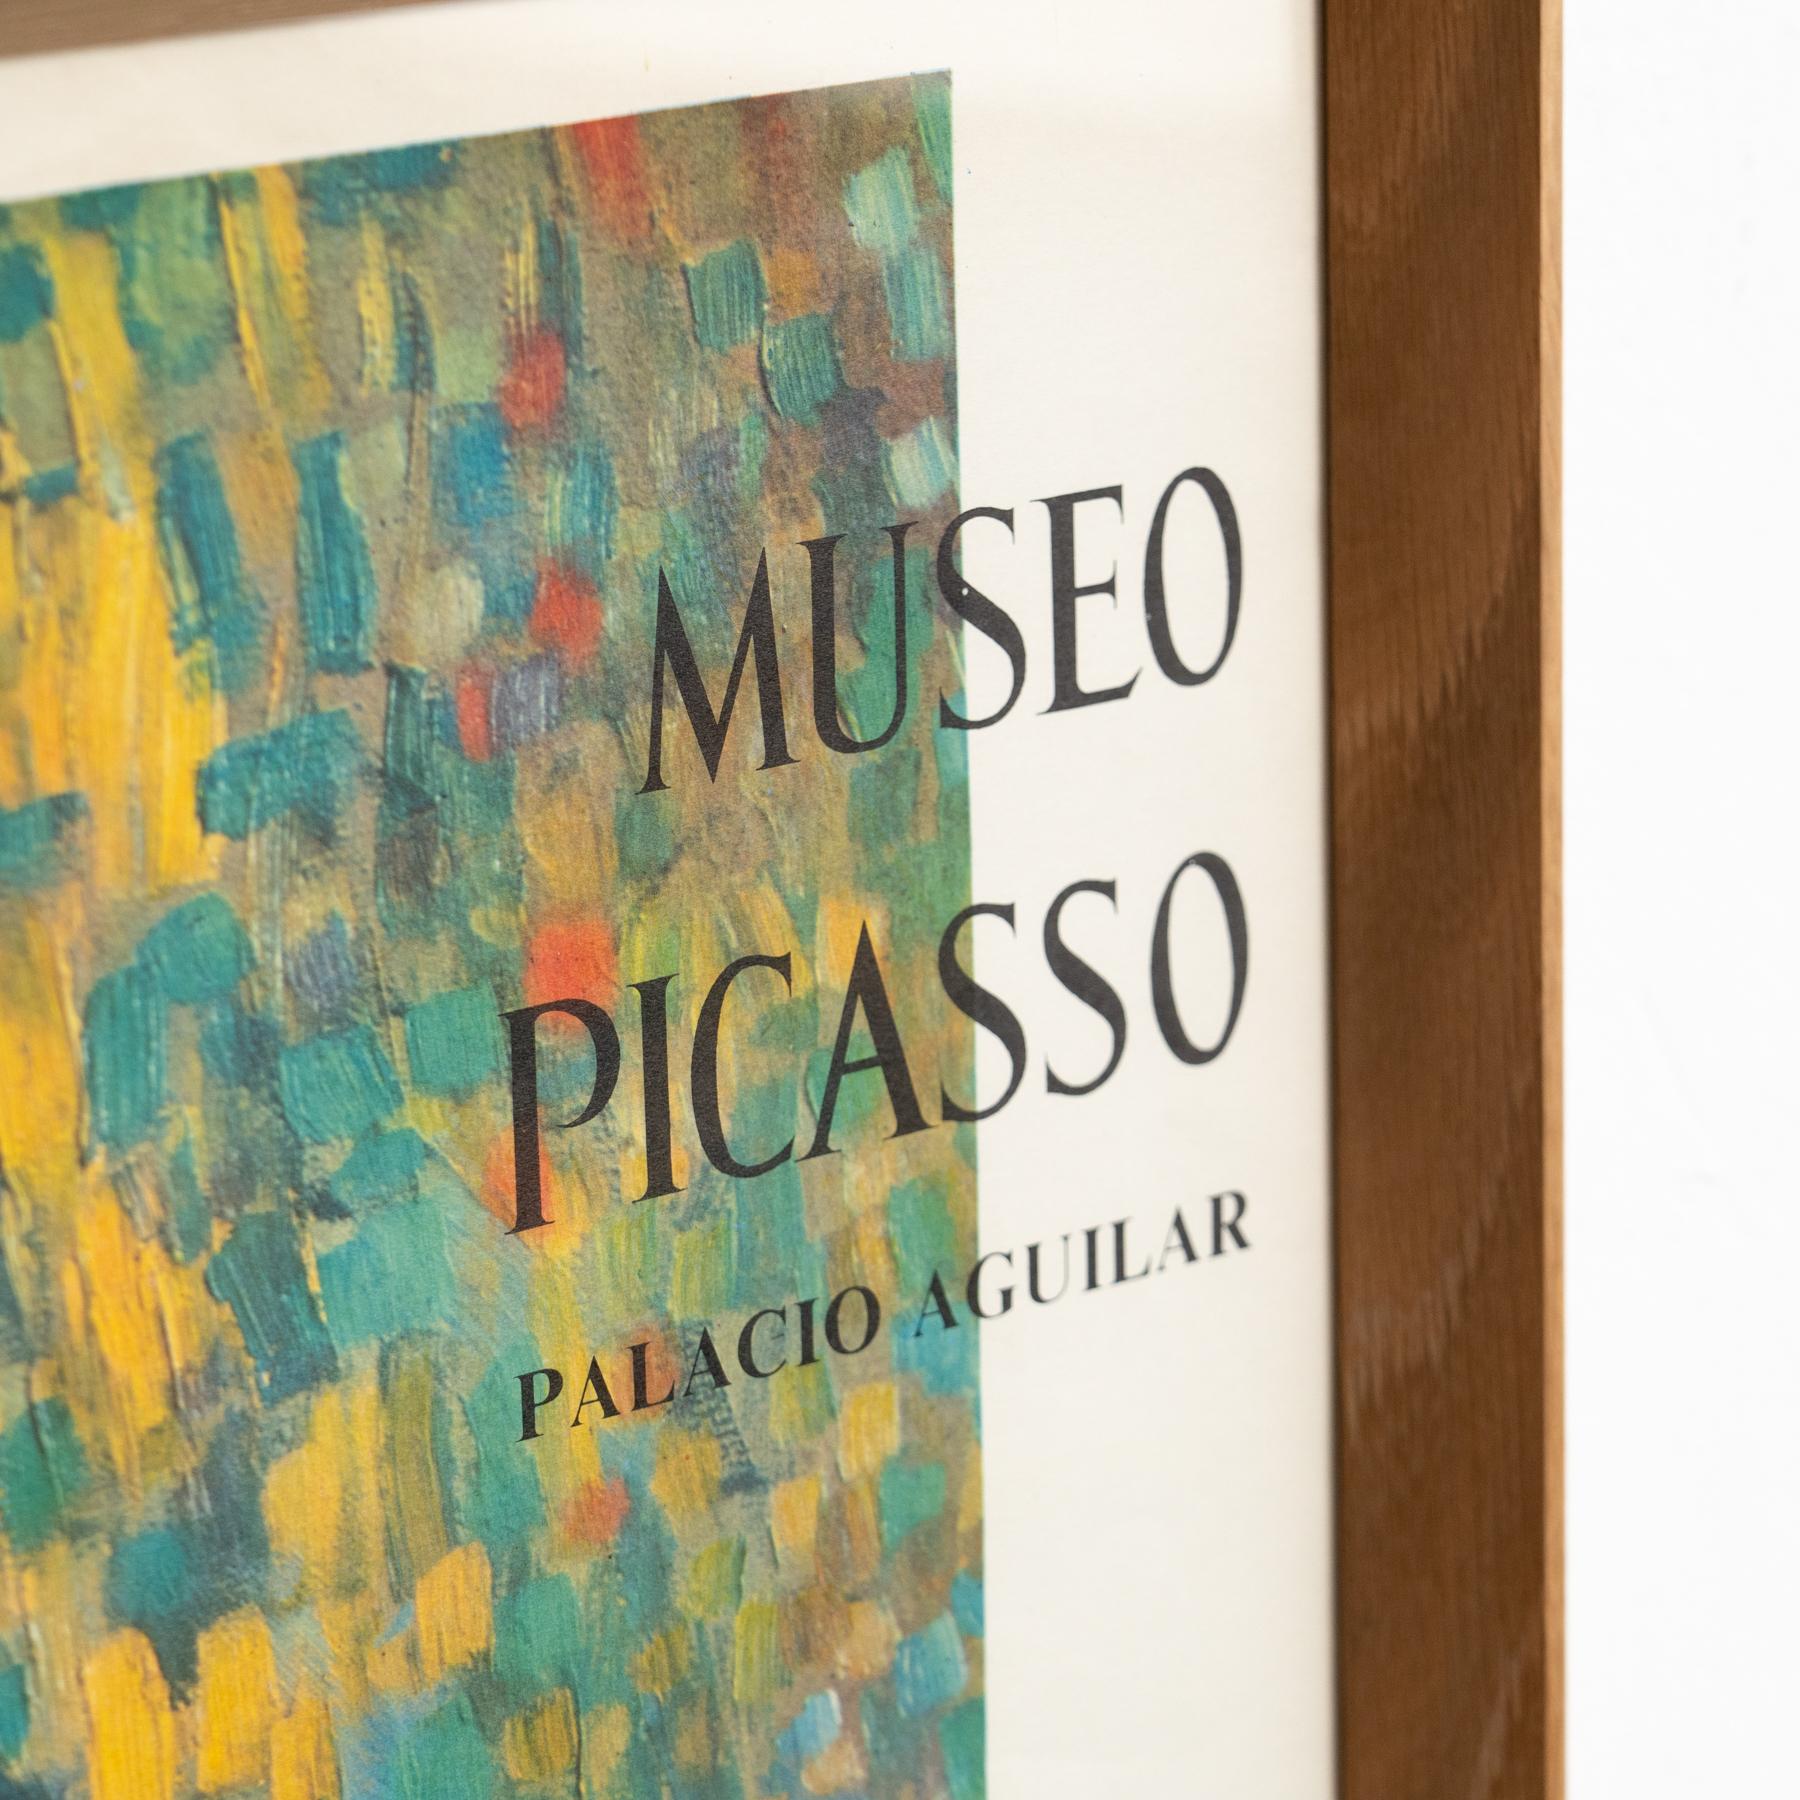 Picasso's 'L'Attente 1901': Original Framed Museo Picasso Poster, 1966 For Sale 3